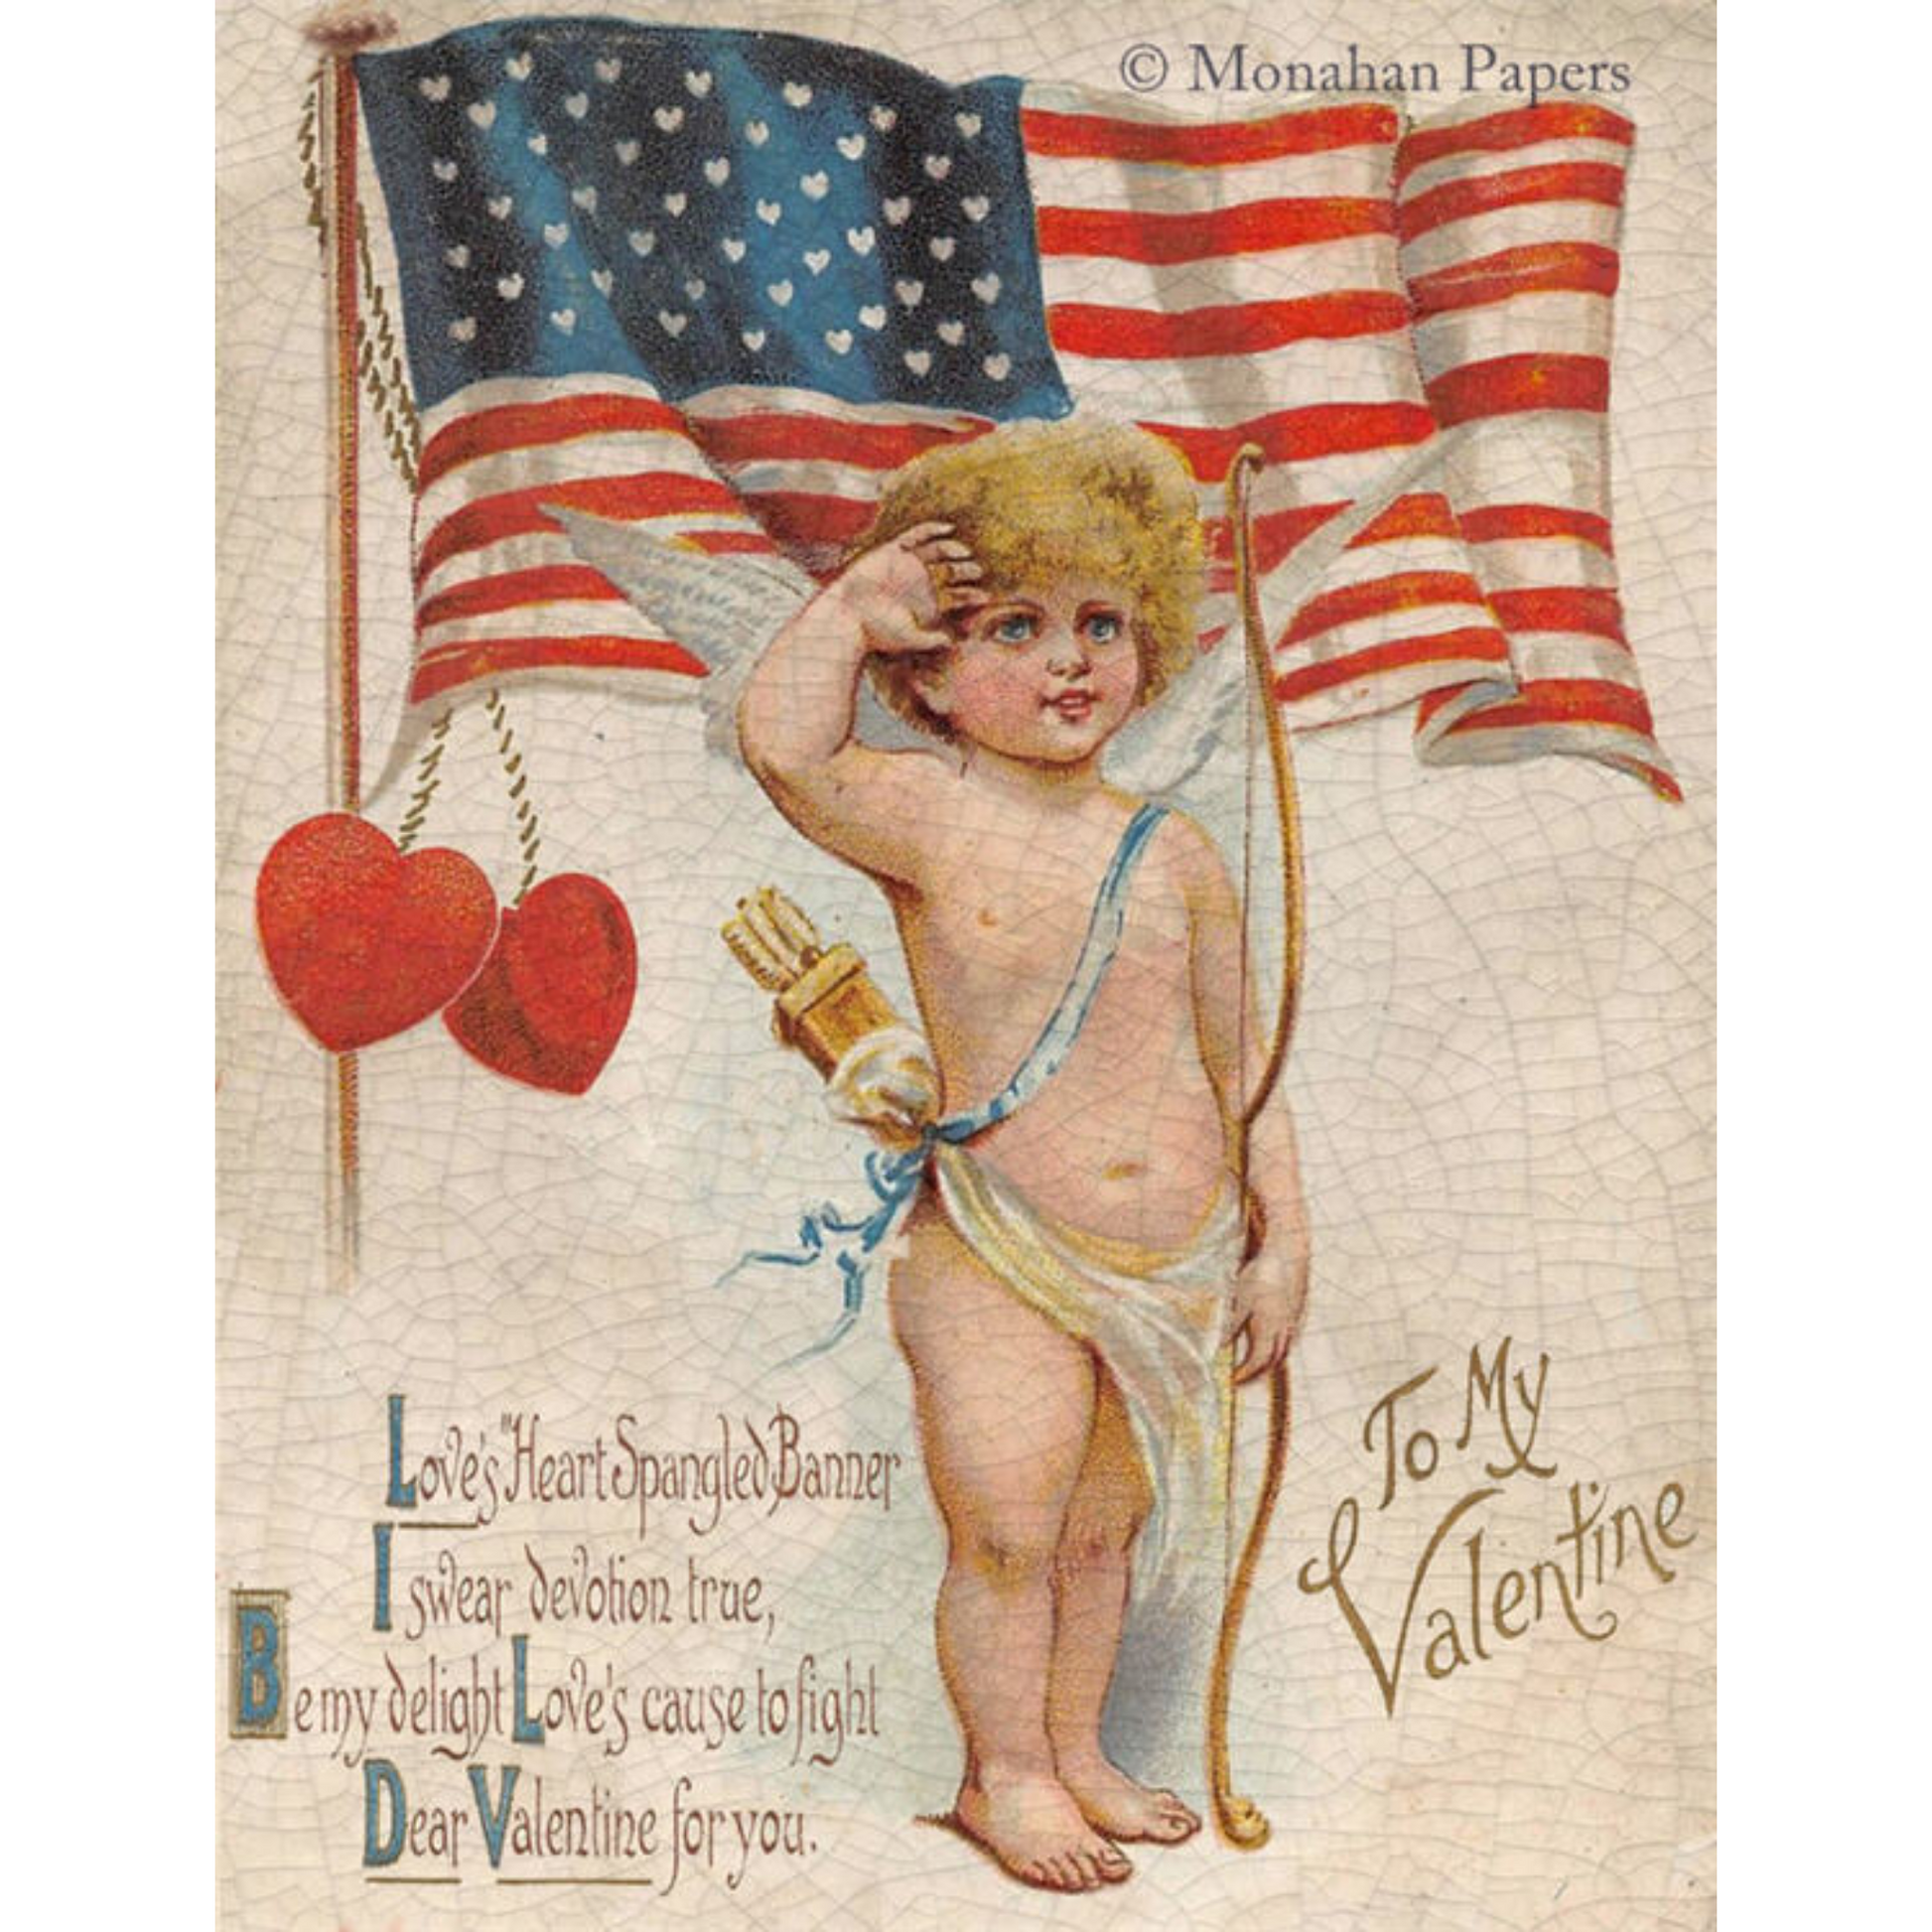 Heart Spangles Banner Monahan Papers for decoupage. 11" x 17" available at Milton's Daughter. Saluting cupid with American Flag. Valentine's Day  motif.